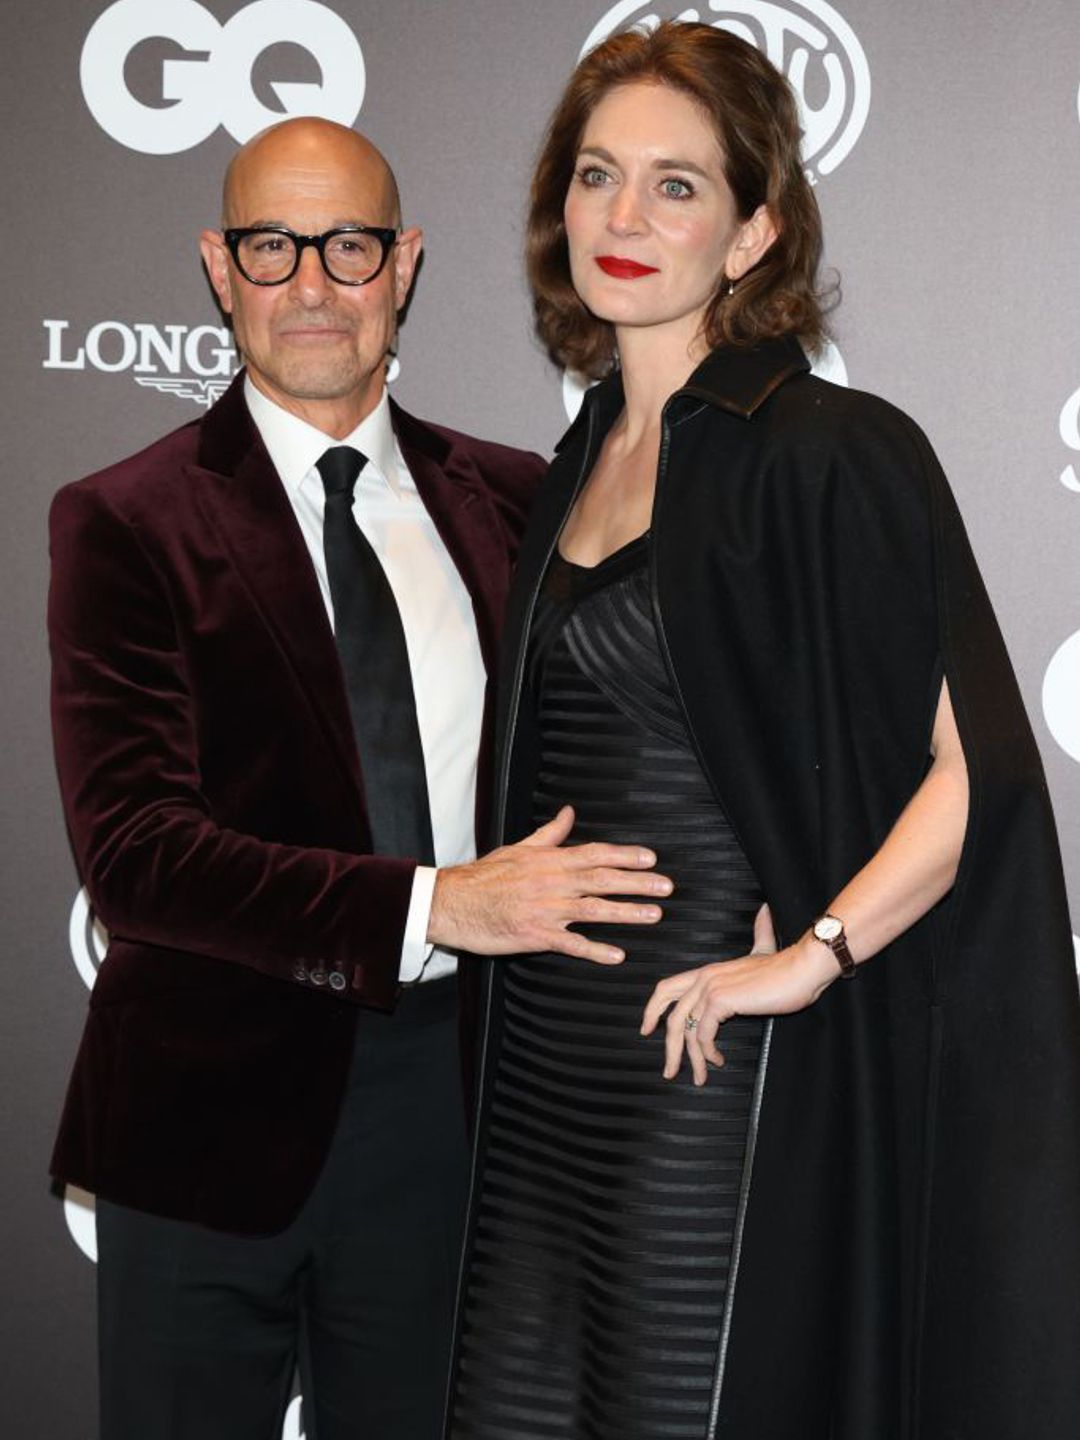 Stanley Tucci with his wife, literary agent Felicity Blunt, on the red caret at a GQ event